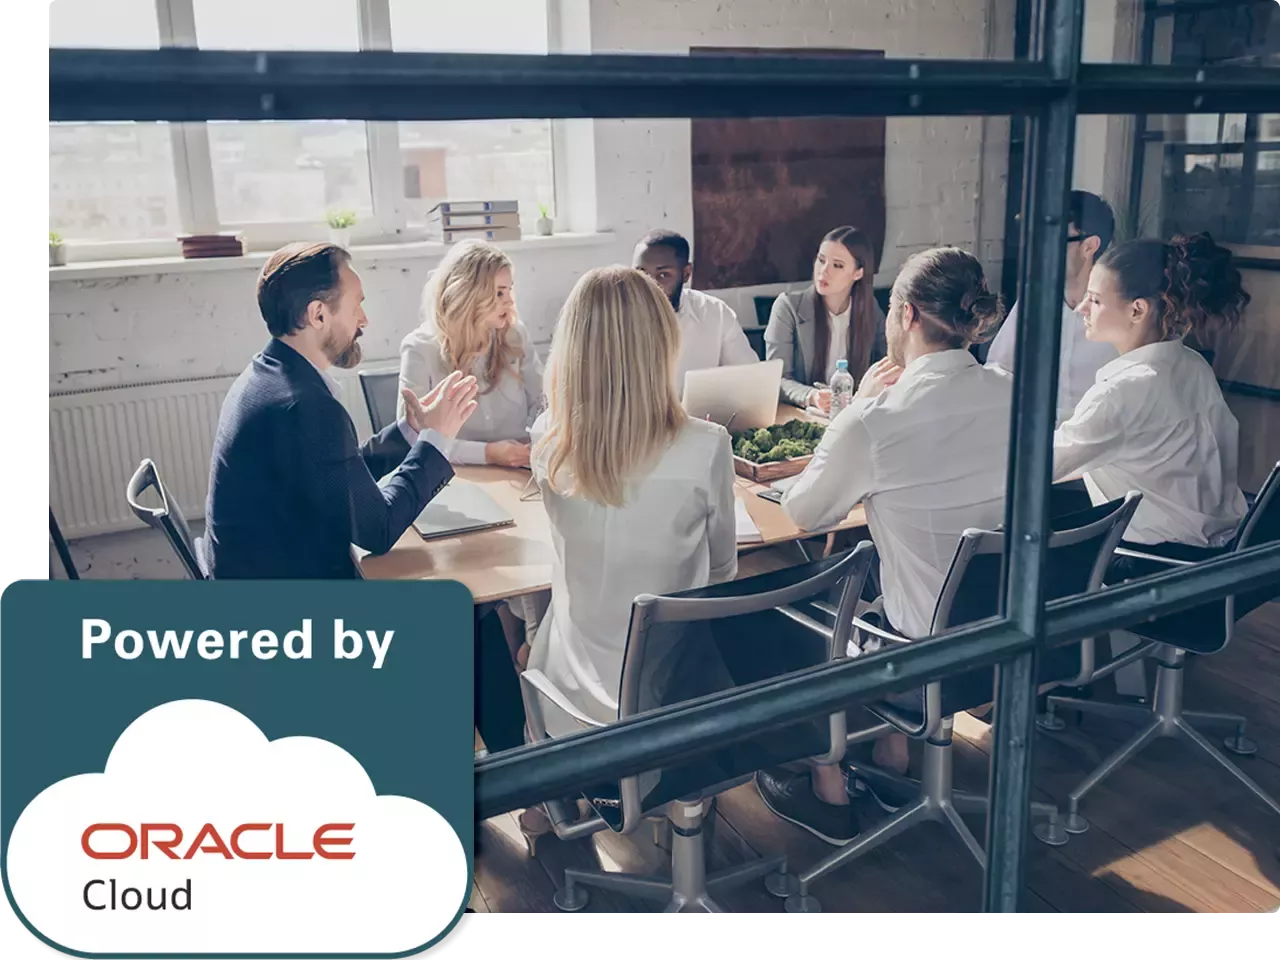 Group of people sitting around a conference table behind glass; Powered by Oracle Cloud logo